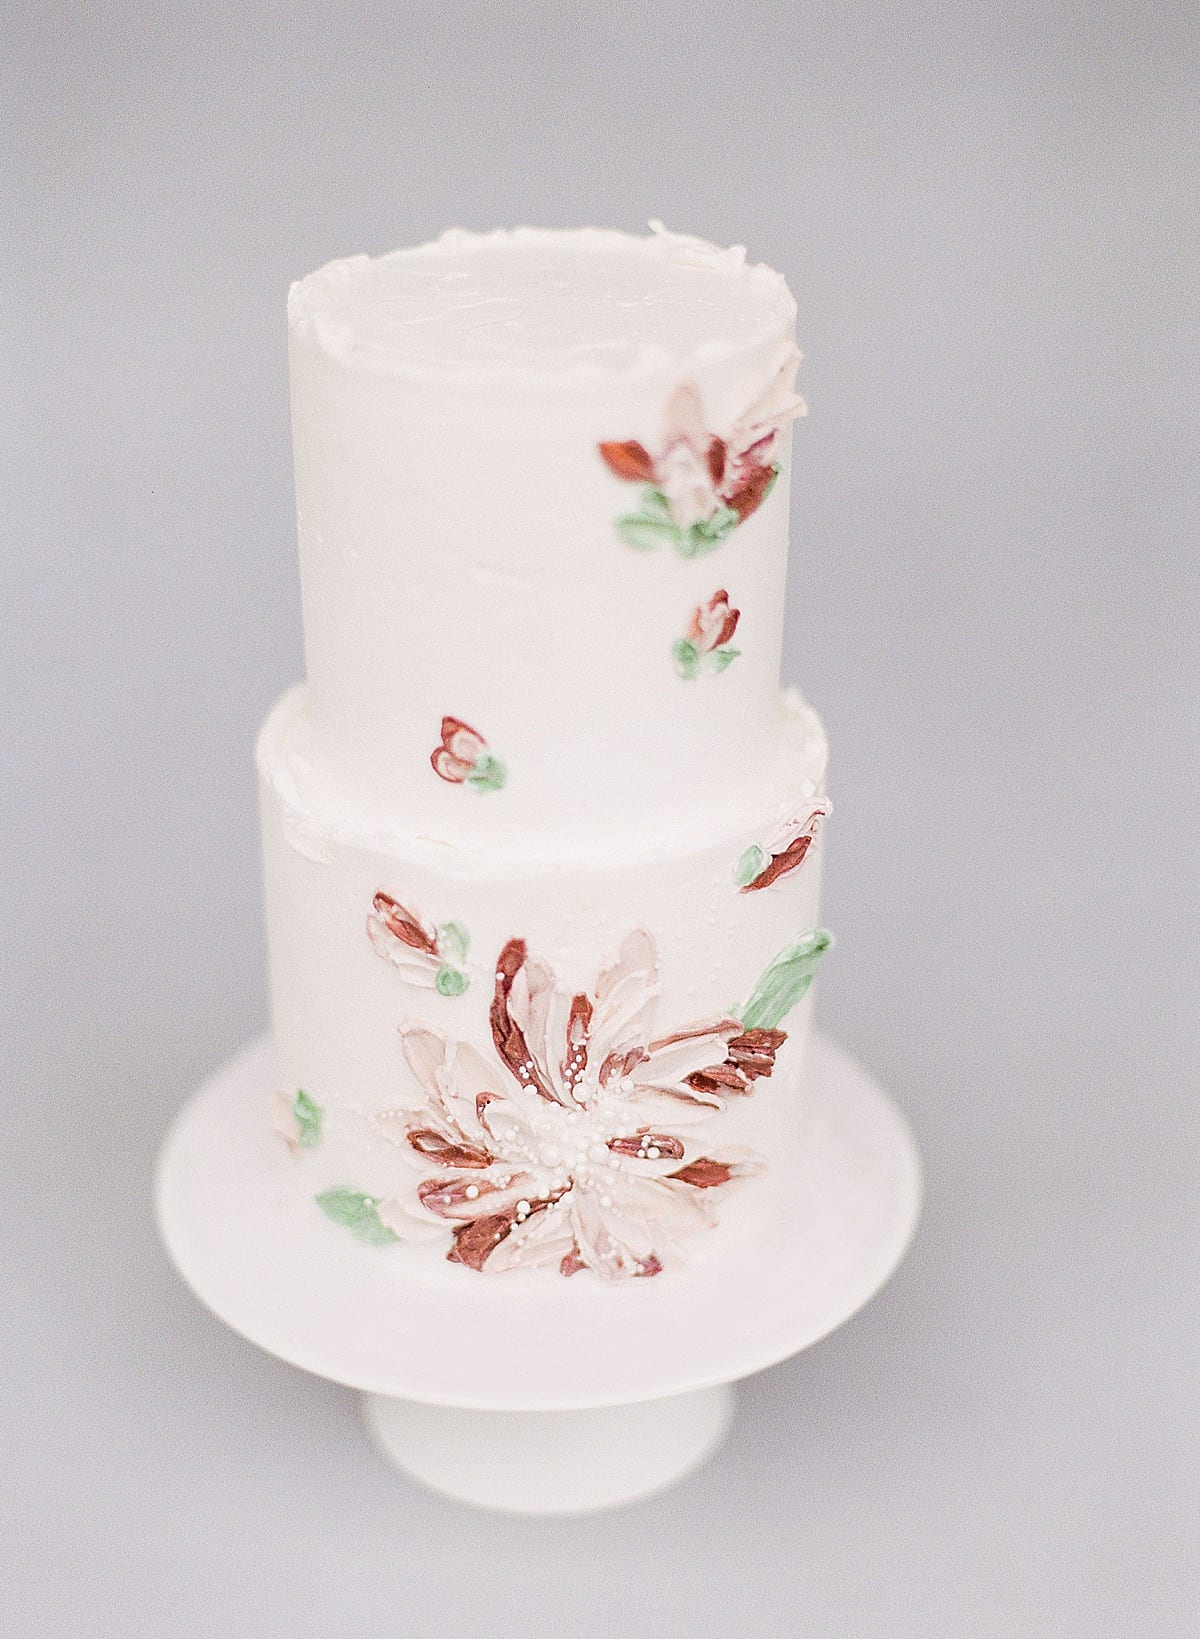 Palette Painted Wedding Cake with Pink and Red Flowers Photo